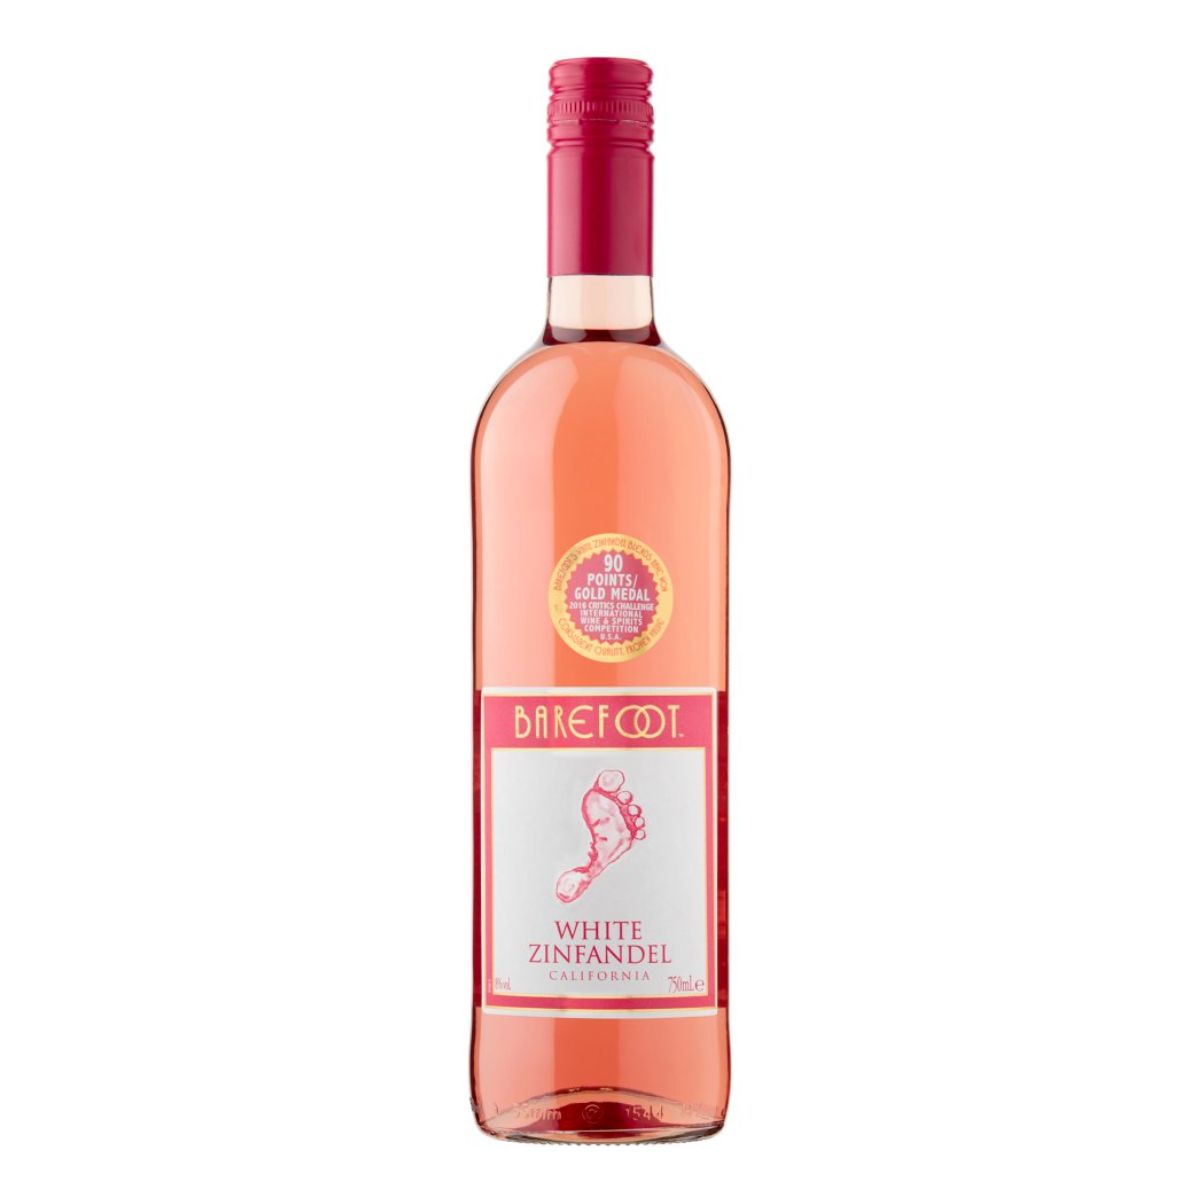 A bottle of Barefoot - White Zinfandel Rose Wine (8.0% ABV) - 750ml with a pink label.